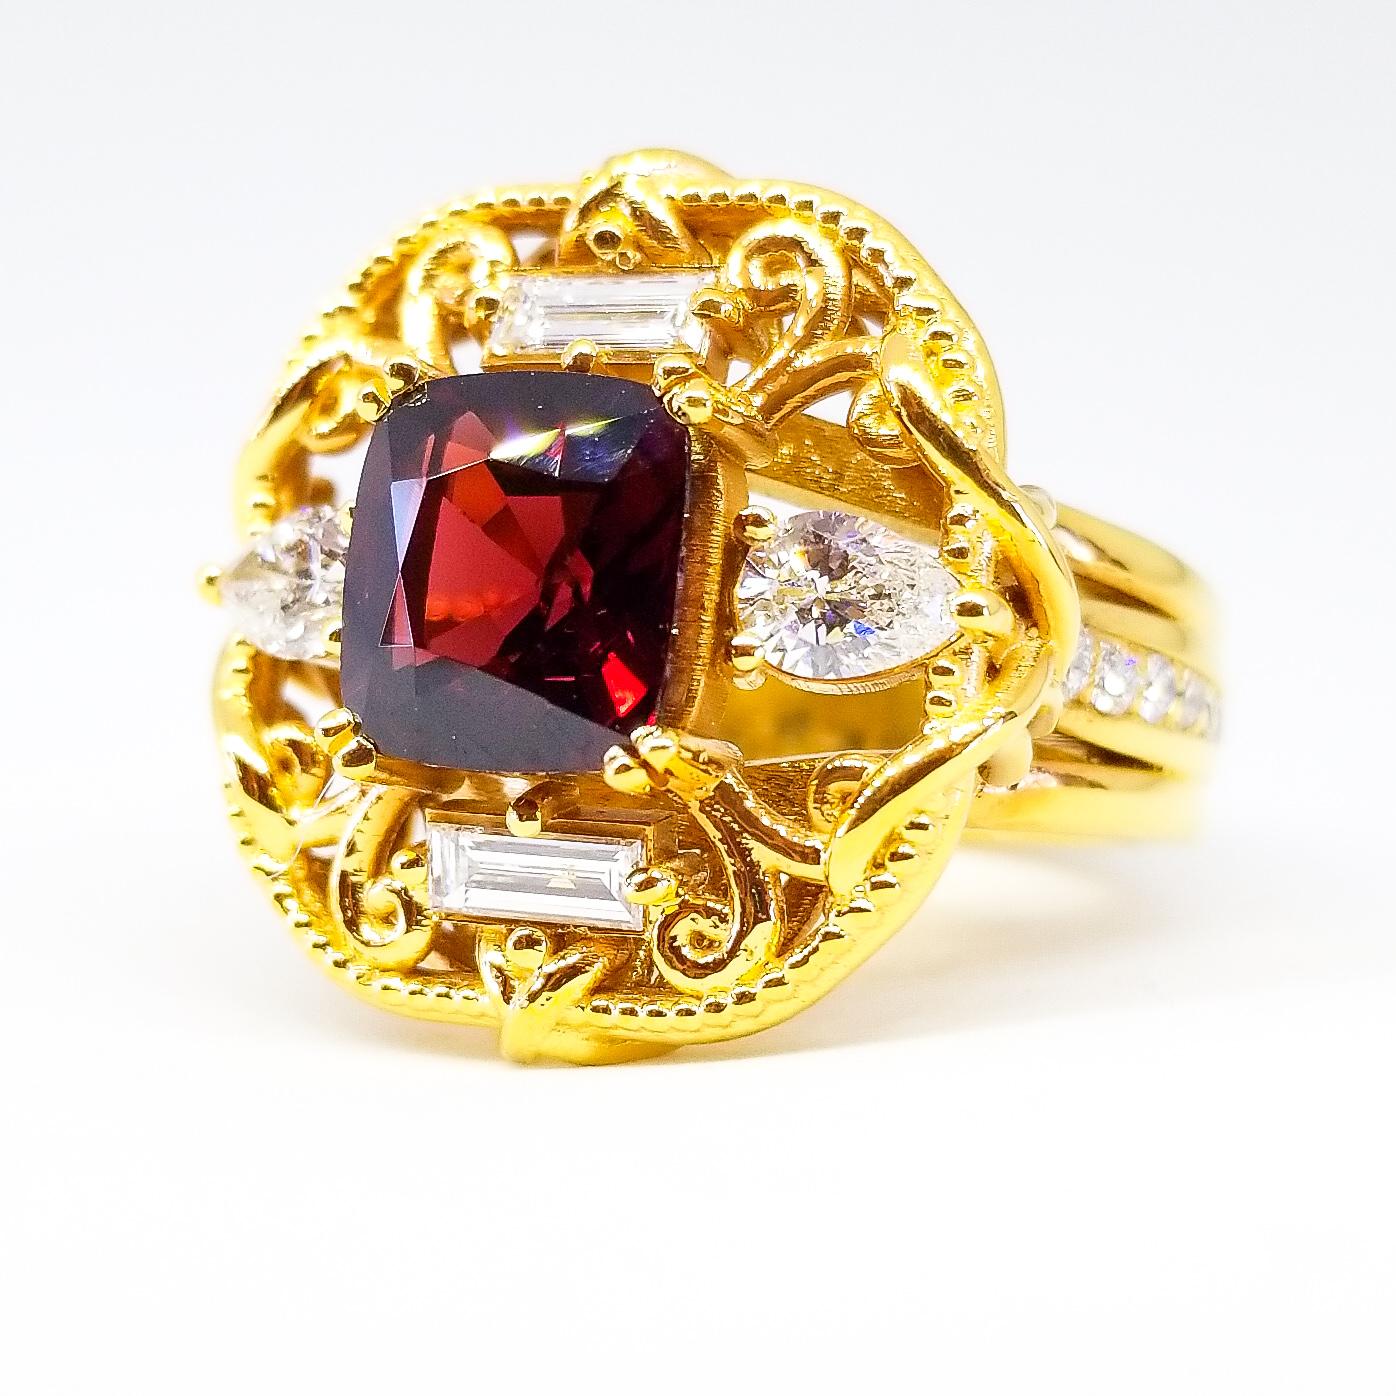 Antique Cushion Cut GIA Certified Natural 2.69 Carat Cushion Holiday Red Spinel White Diamond Ring